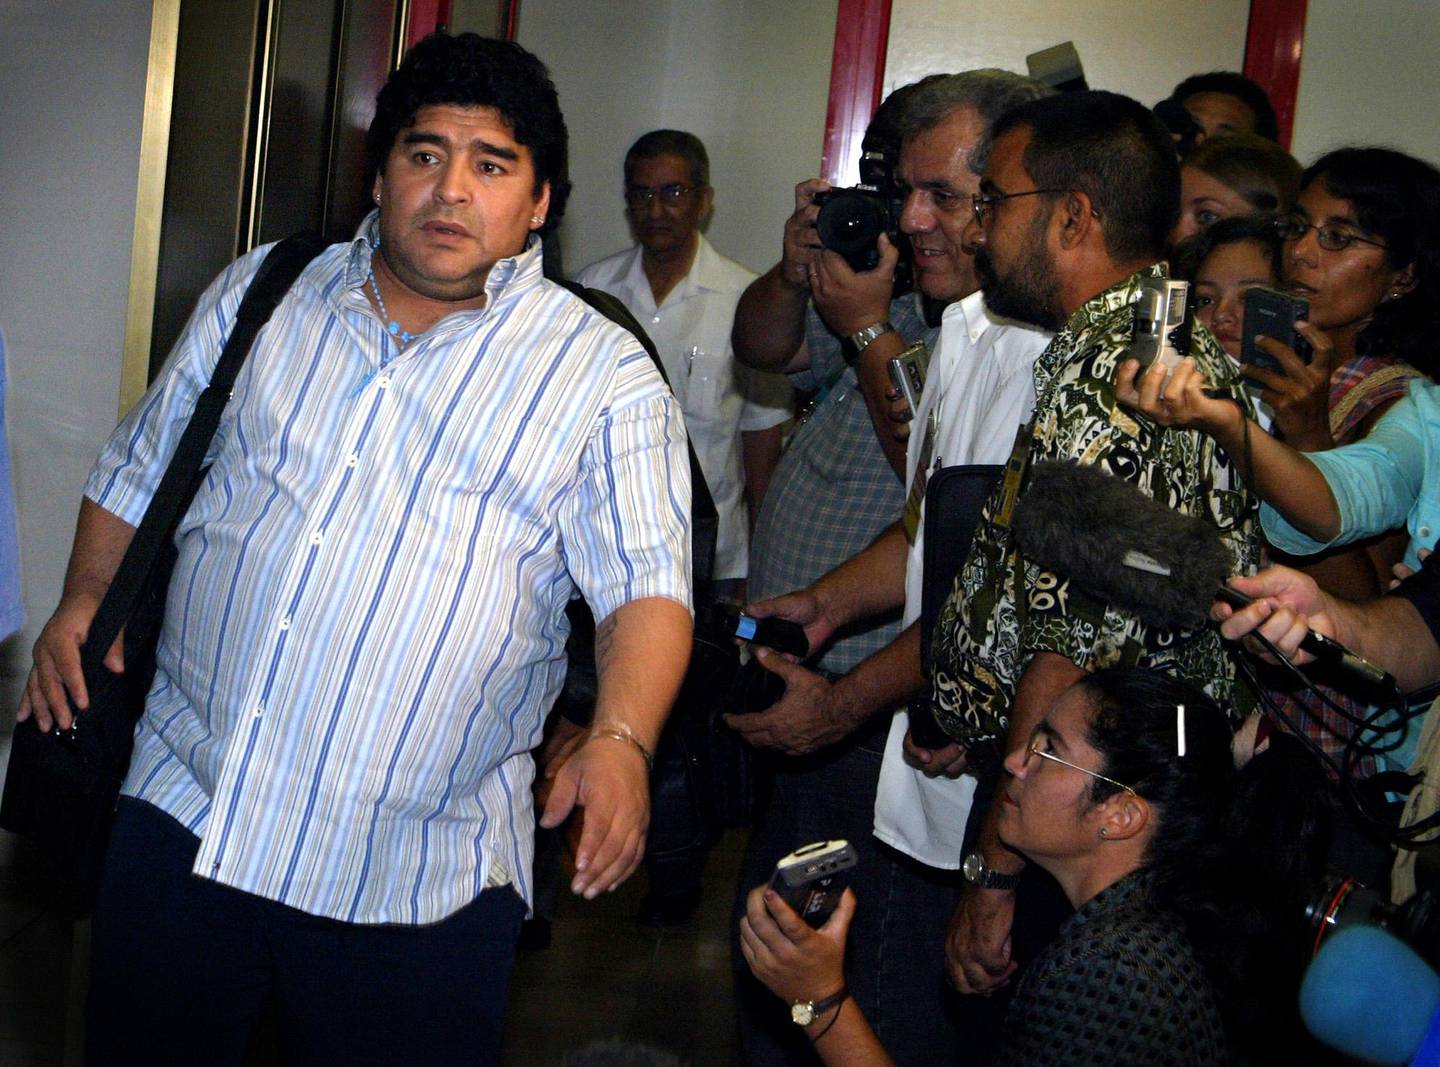 Argentine soccer legend Diego Maradona, left, arrives to Cuba to resume his drug rehabilitation in the outskirts of Buenos Aires, Monday, Sept. 20, 2004. Former soccer great Diego Maradona returned to Cuba on Monday to resume treatment for cocaine addiction after a relapse confined him to a psychiatric hospital in his native Argentina and sparked unsuccessful attempts by his family to keep him at home.  (AP Photos/Christobal Herrera)